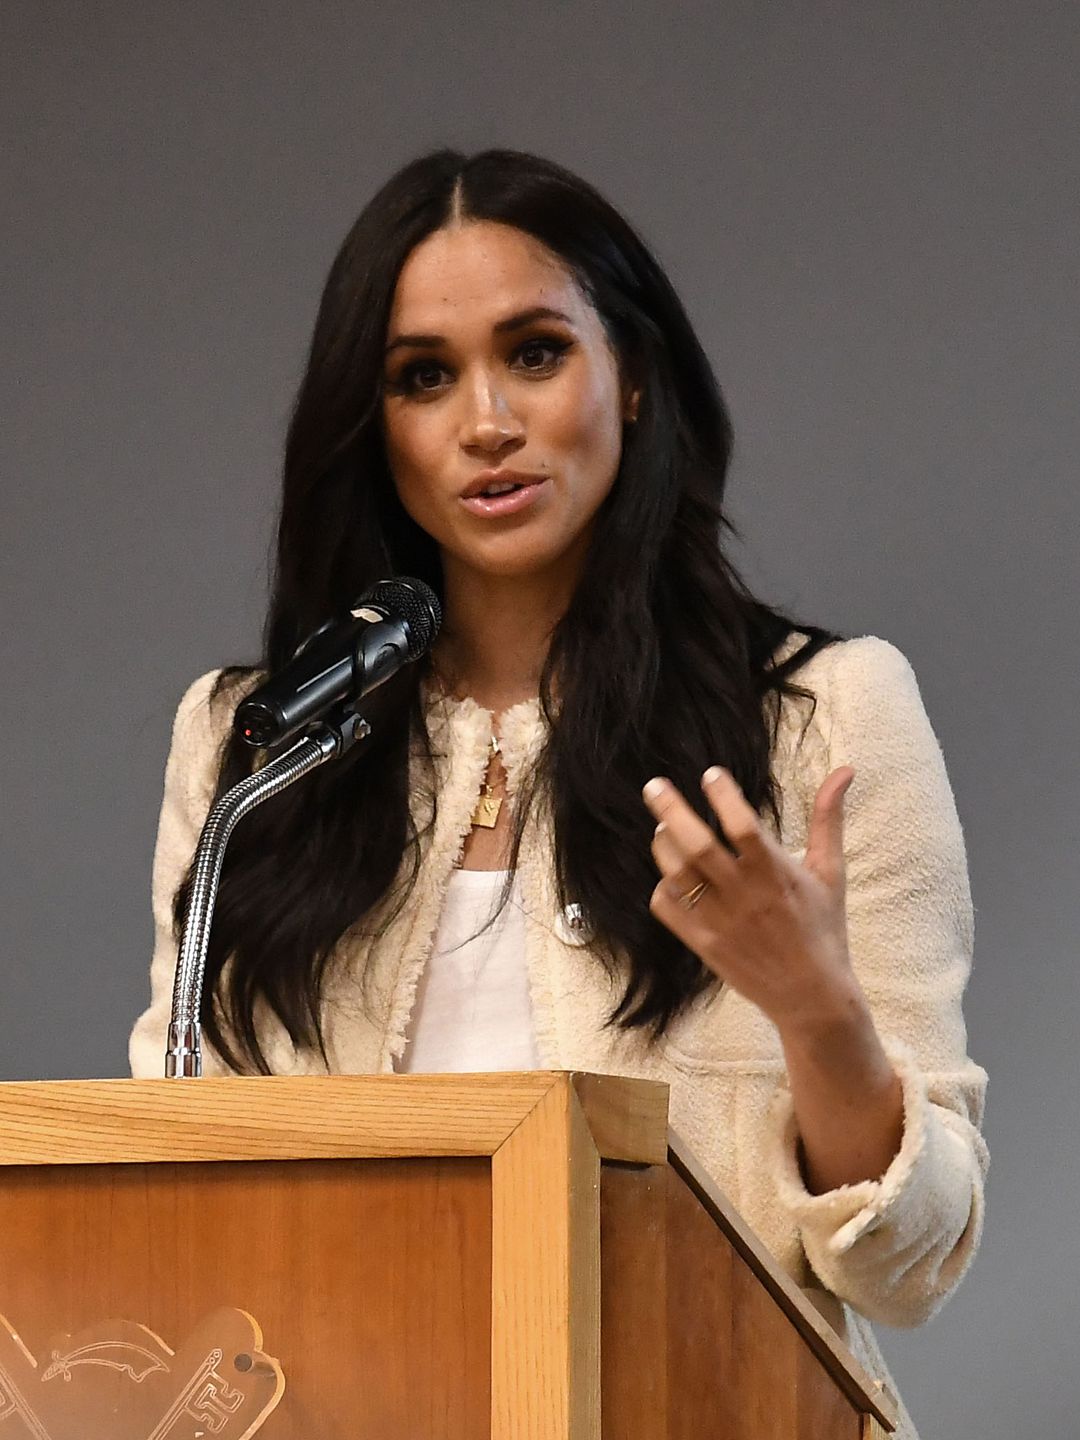 LONDON, ENGLAND - MARCH 06: Meghan, Duchess of Sussex speaks during a special school assembly at the Robert Clack Upper School in Dagenham ahead of International Womenâs Day (IWD) held on Sunday 8th March, on March 6, 2020 in London, England.   (Photo by Ben Stansall-WPA Pool/Getty Images)